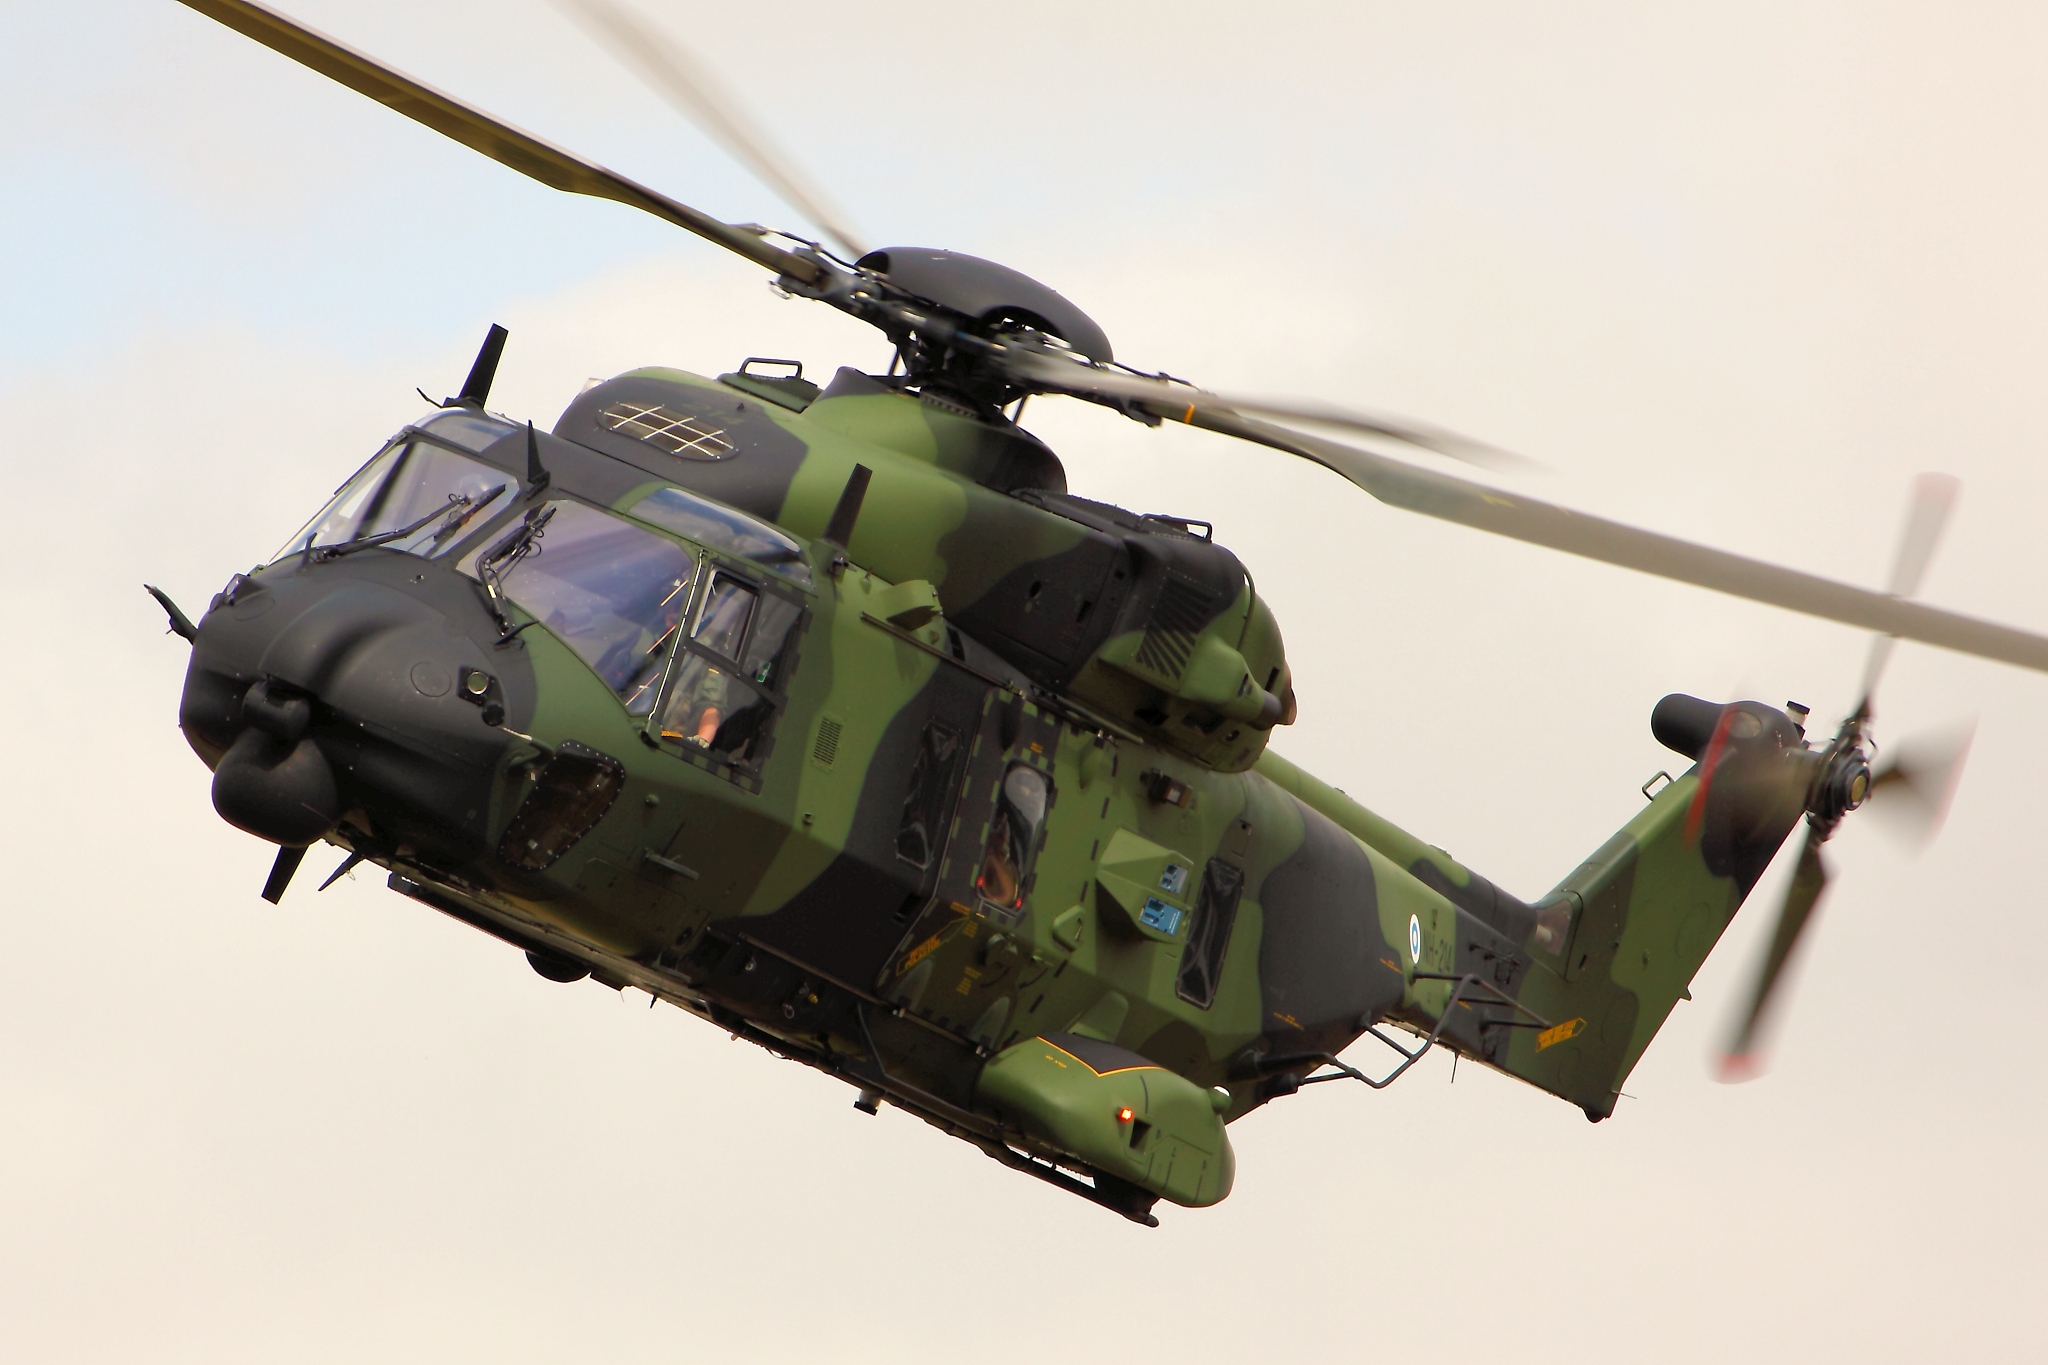 nh wallpaper,helicopter,rotorcraft,helicopter rotor,aircraft,military helicopter